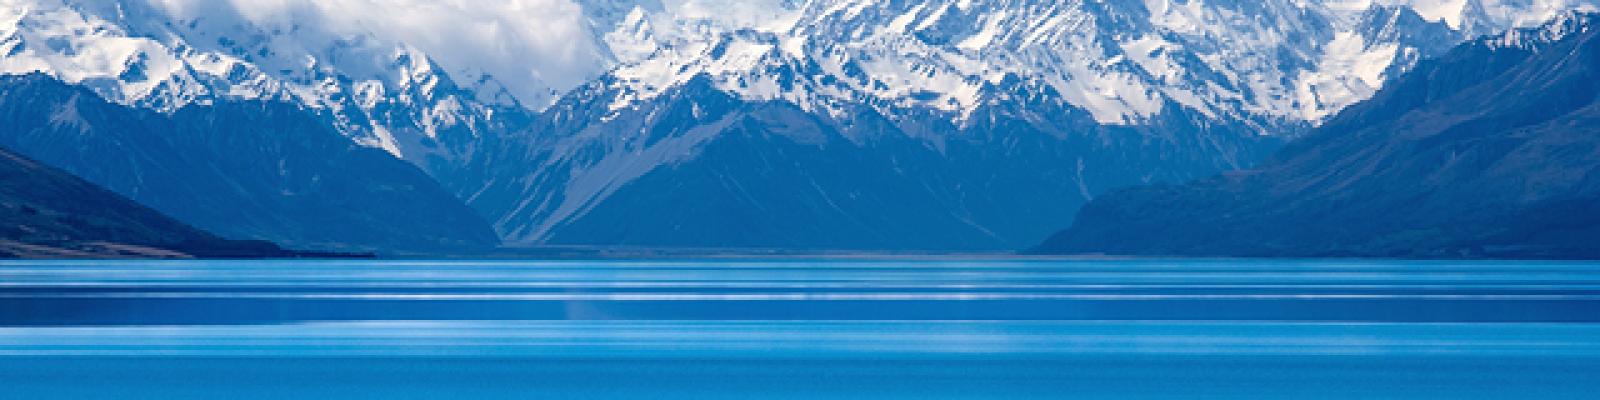 Image of blue bay water in foreground with snow-capped mountains and clouds in the distance